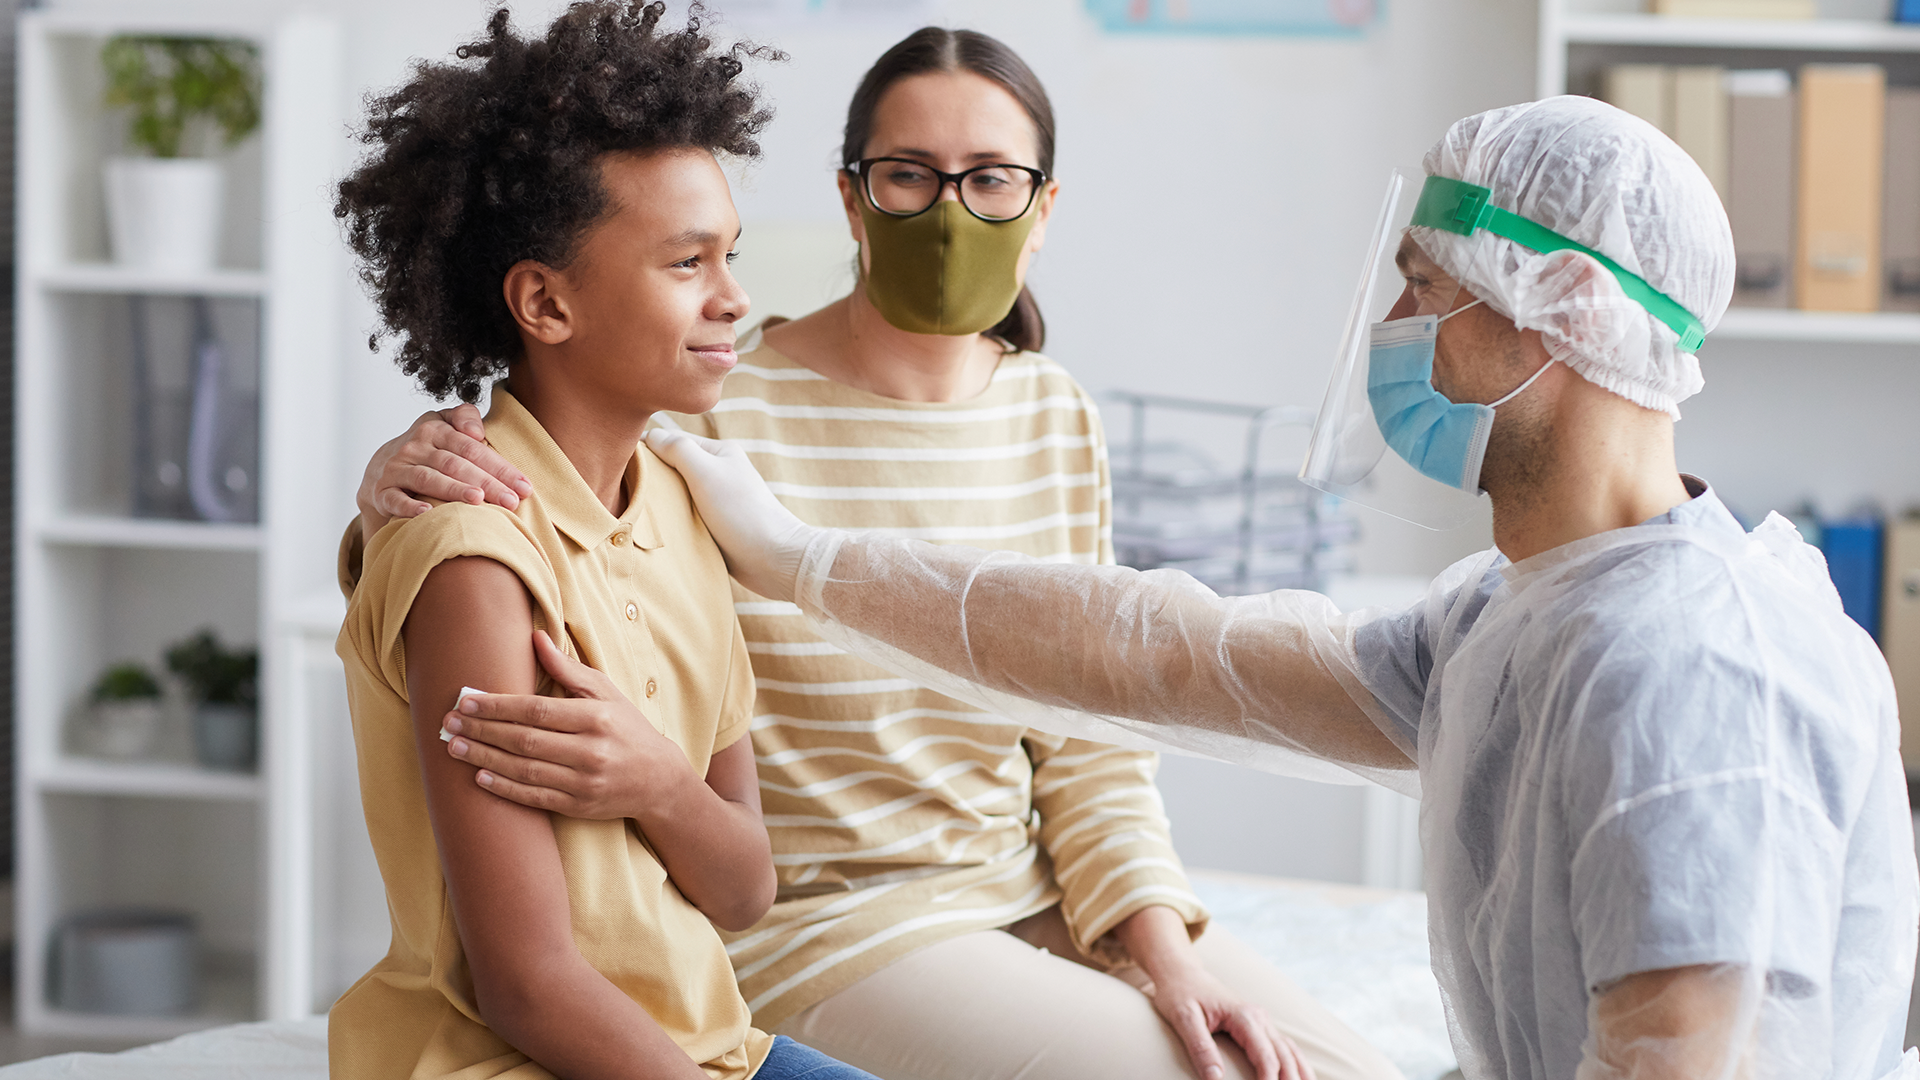 photo of a woman and middle school-aged child sitting side by side at a doctor's office, with a doctor reaching over to kindly touch the child's arm, while the child holds a piece of gauze to this other arm and smiles slightly